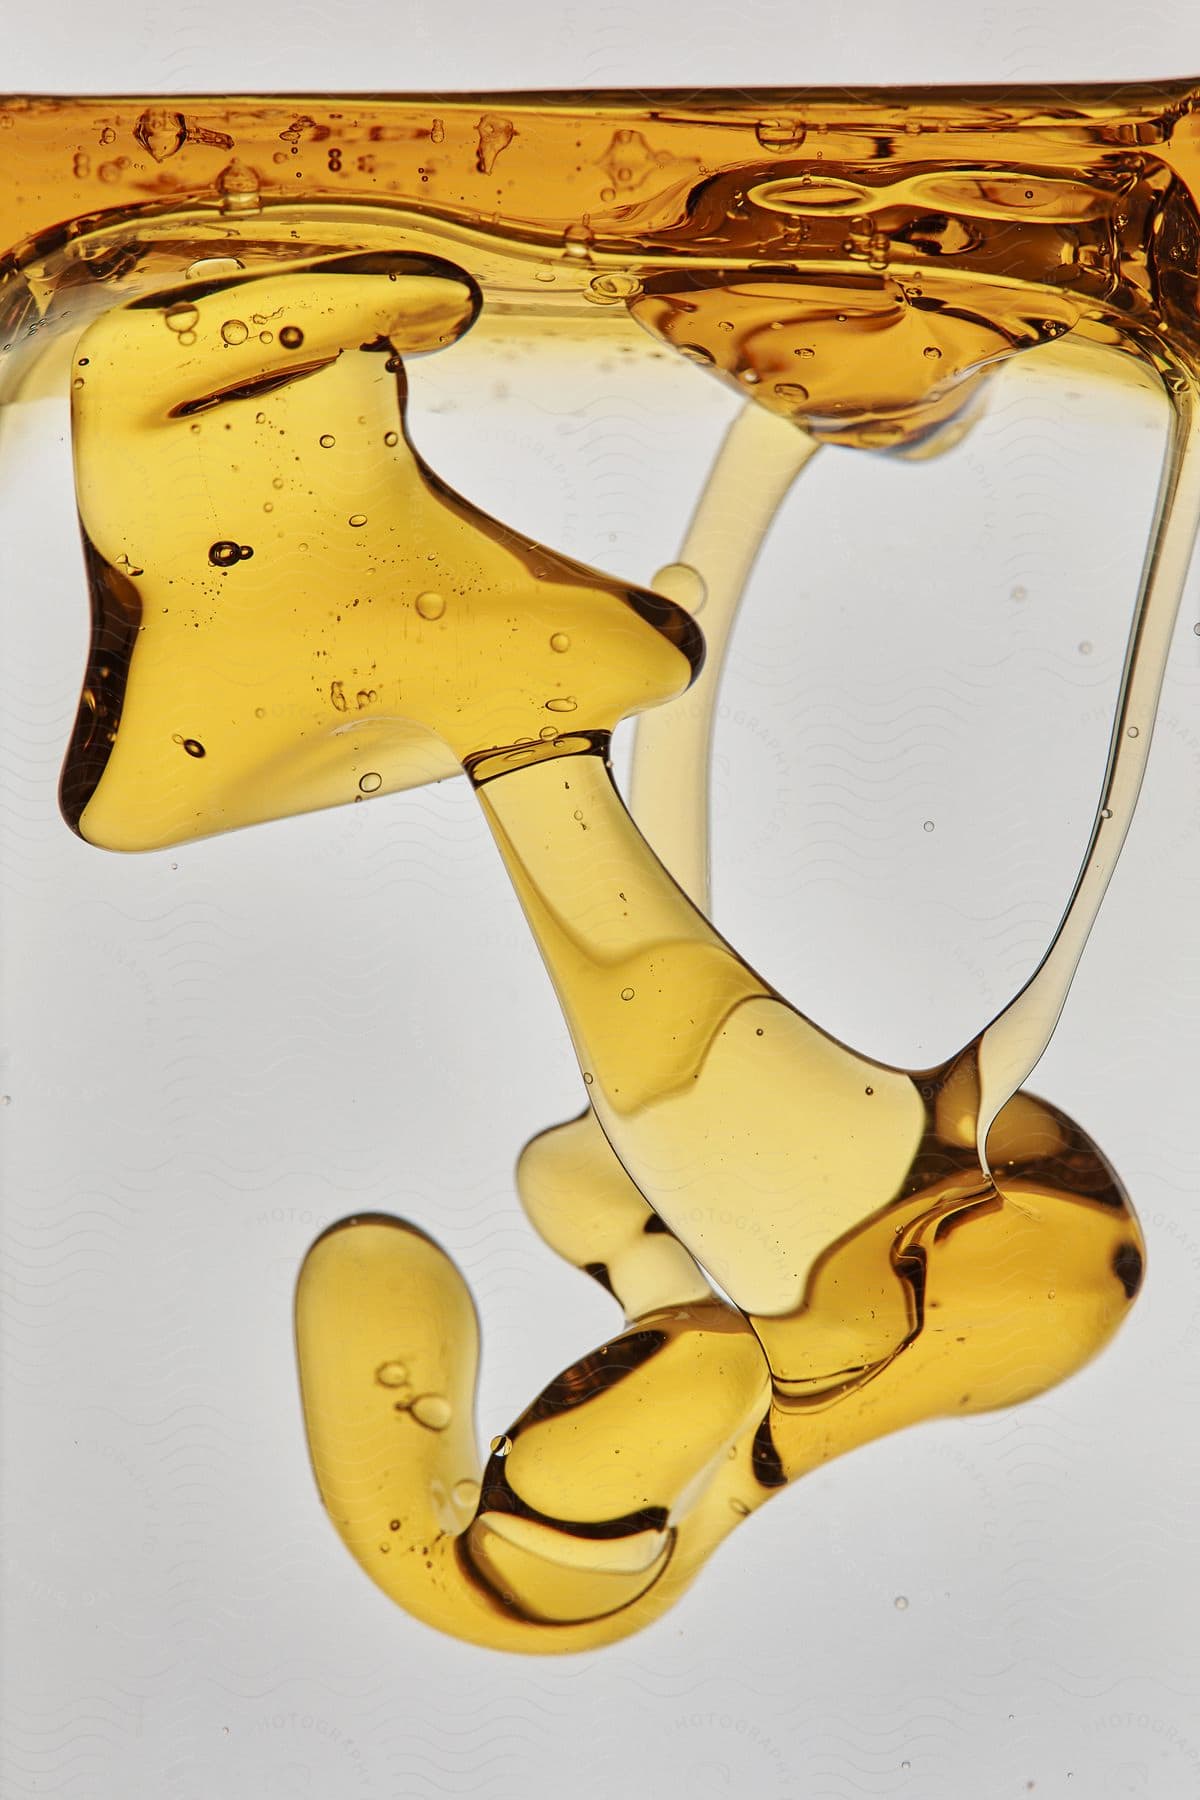 Stock photo of amber syrup floats on the surface and forms mass in the liquid.